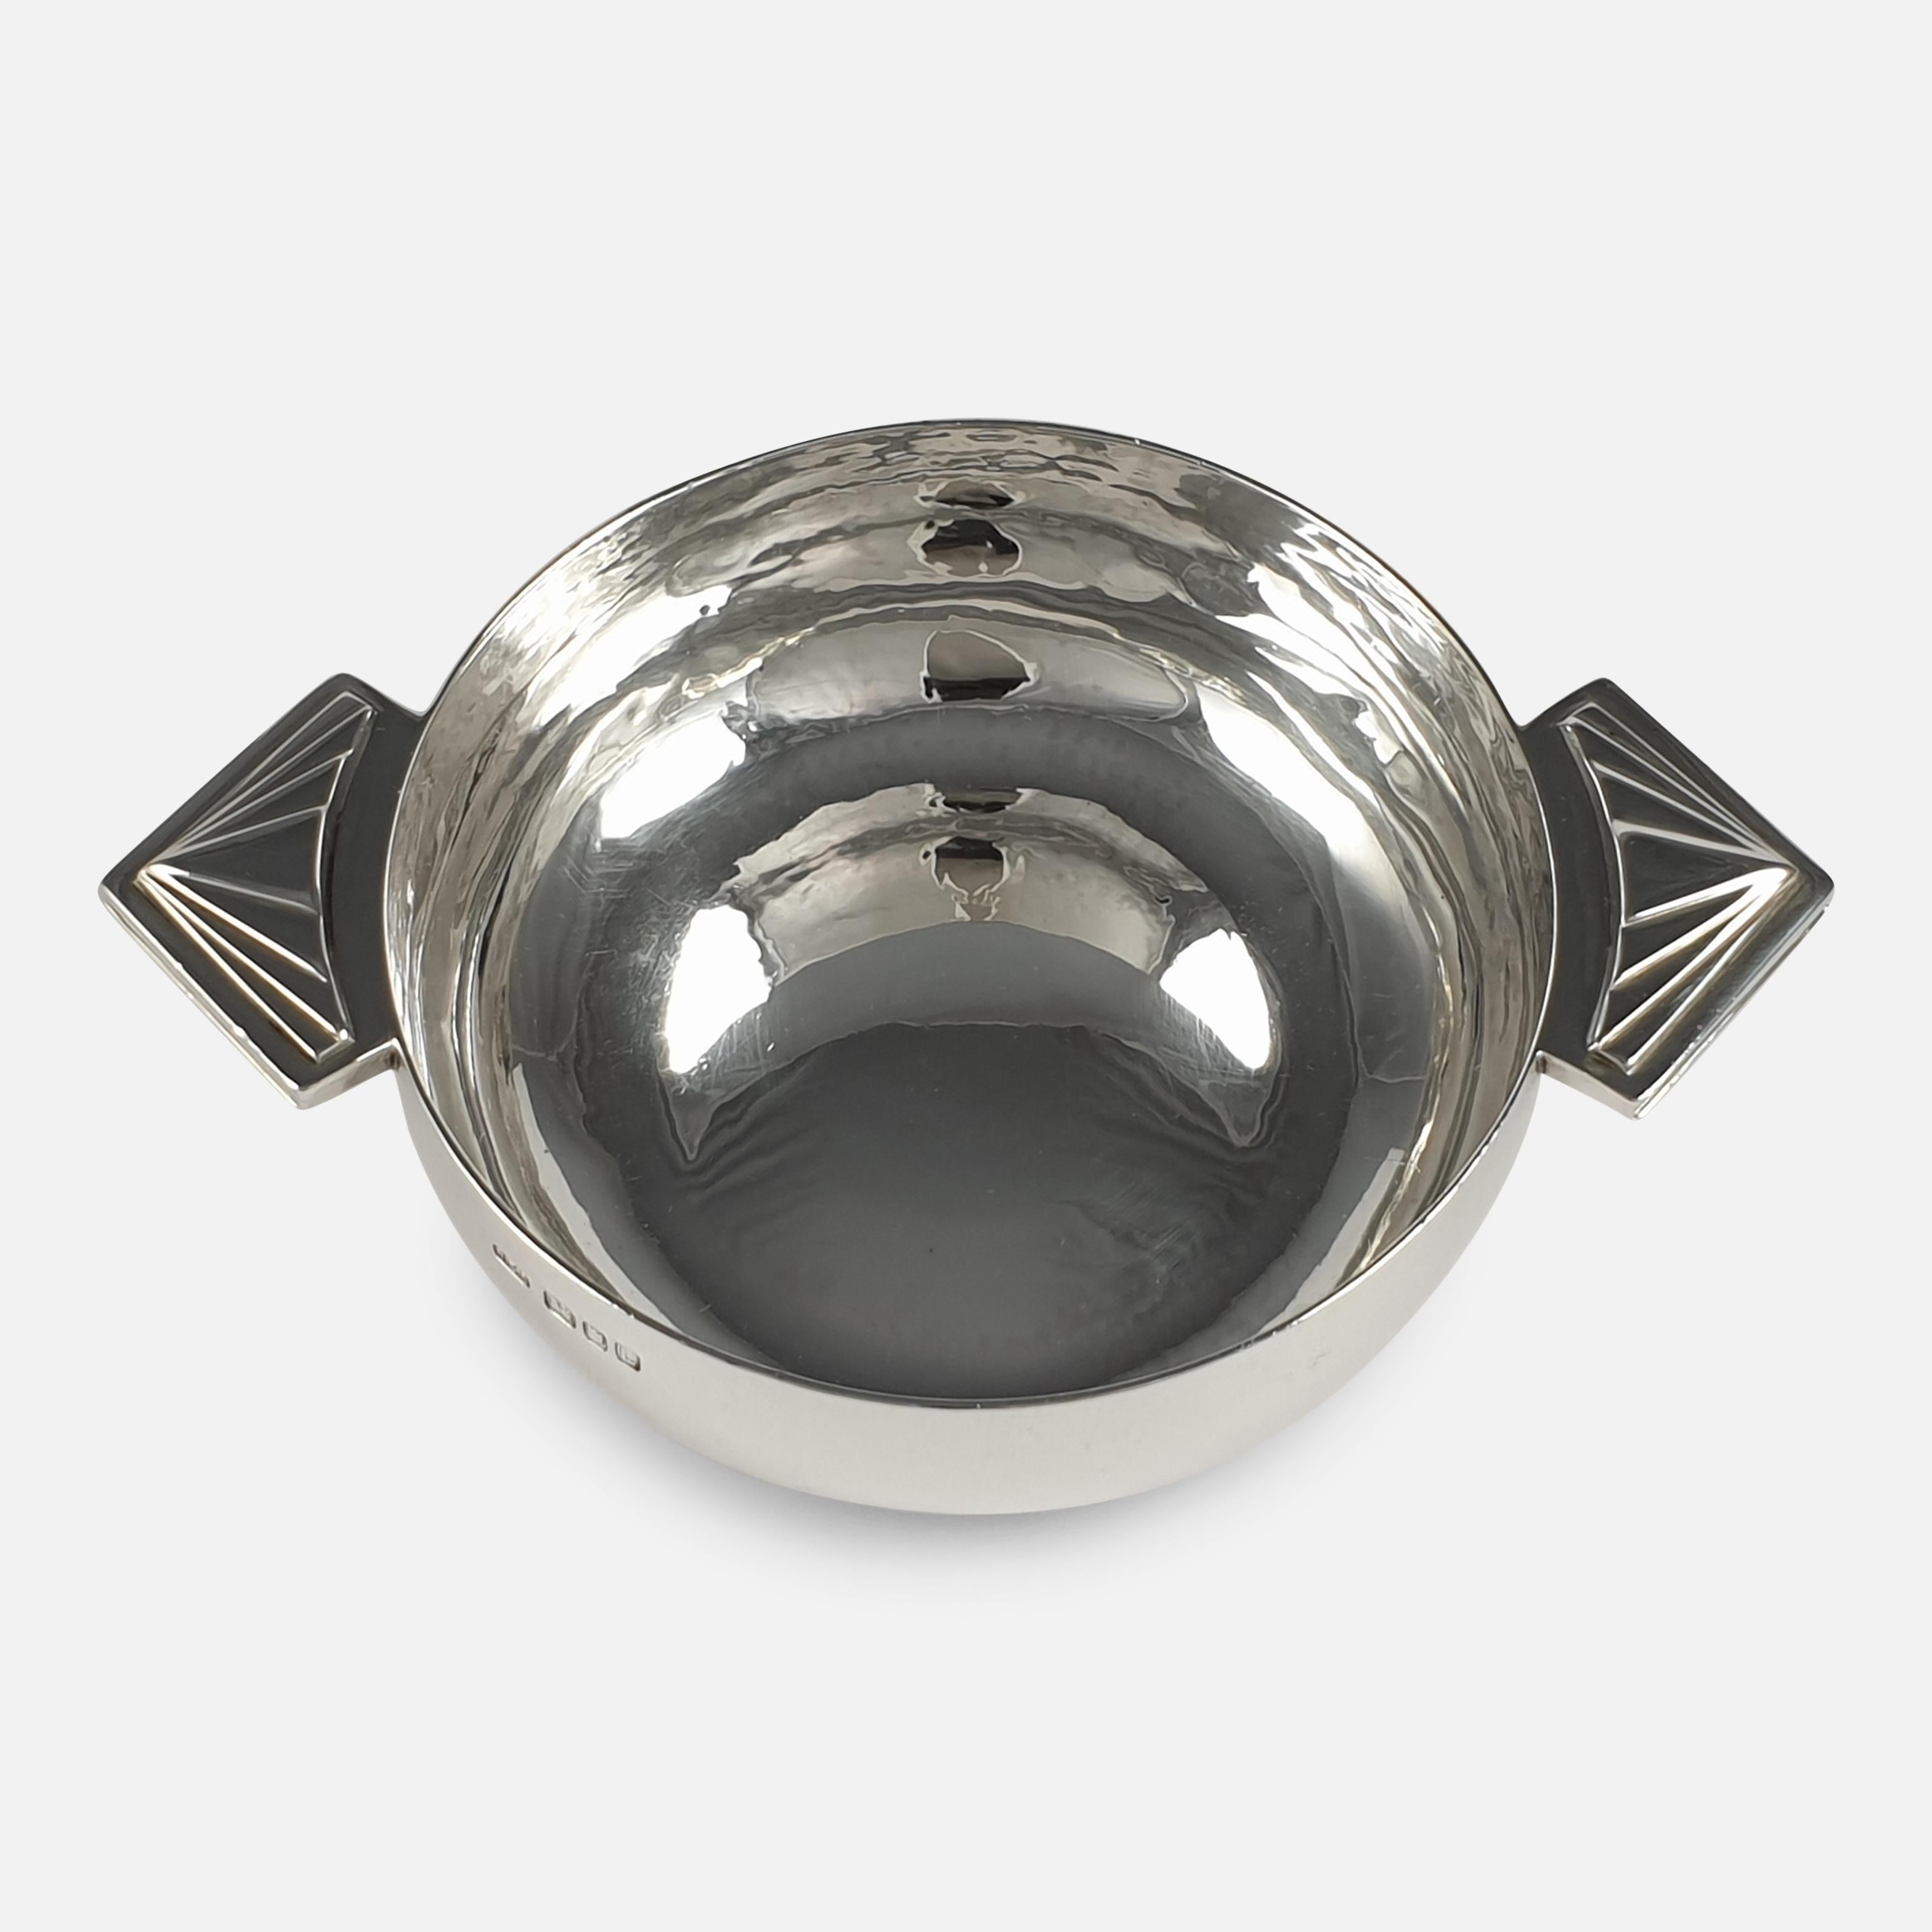 Mid-20th Century Sterling Silver Spot-Hammered Quaich, R.E. Stone, London, 1946 For Sale